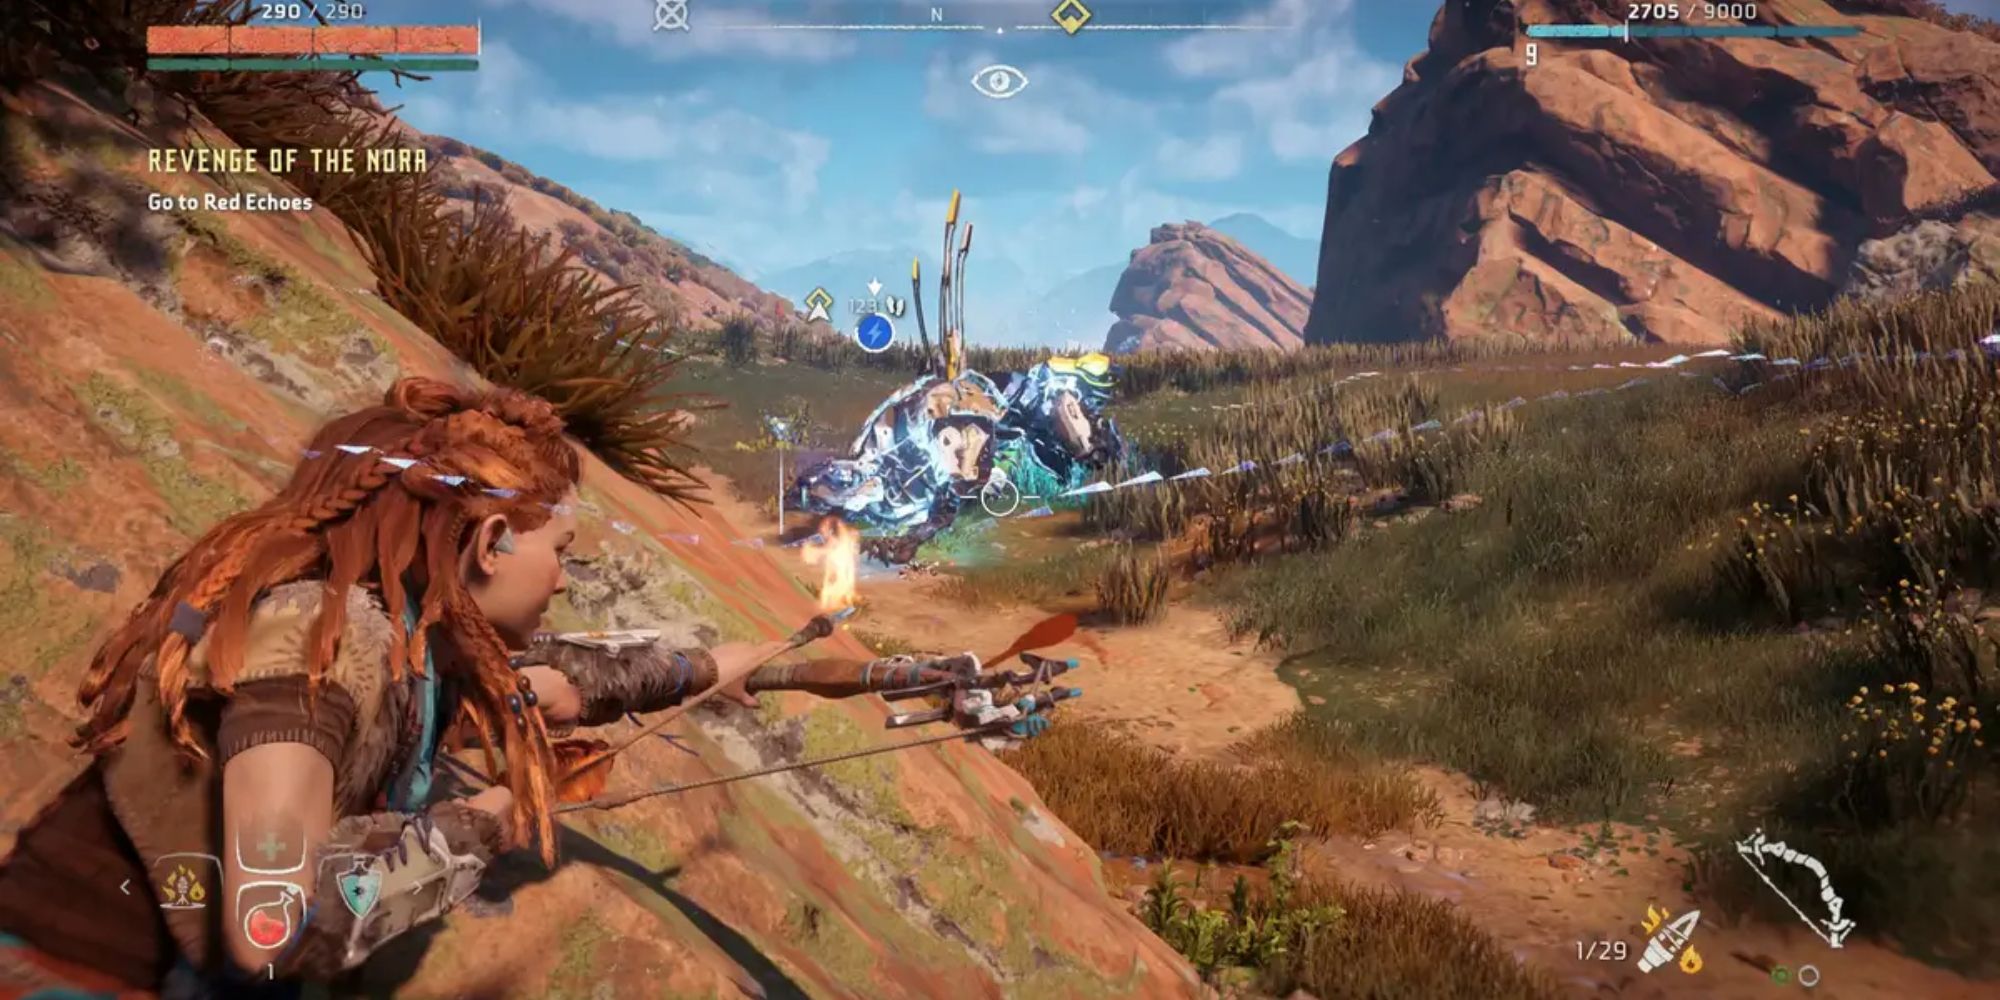 a screenshot of Horizon Zero Dawn gameplay, depicting the main protagonist Aloy with a bow and arrow.